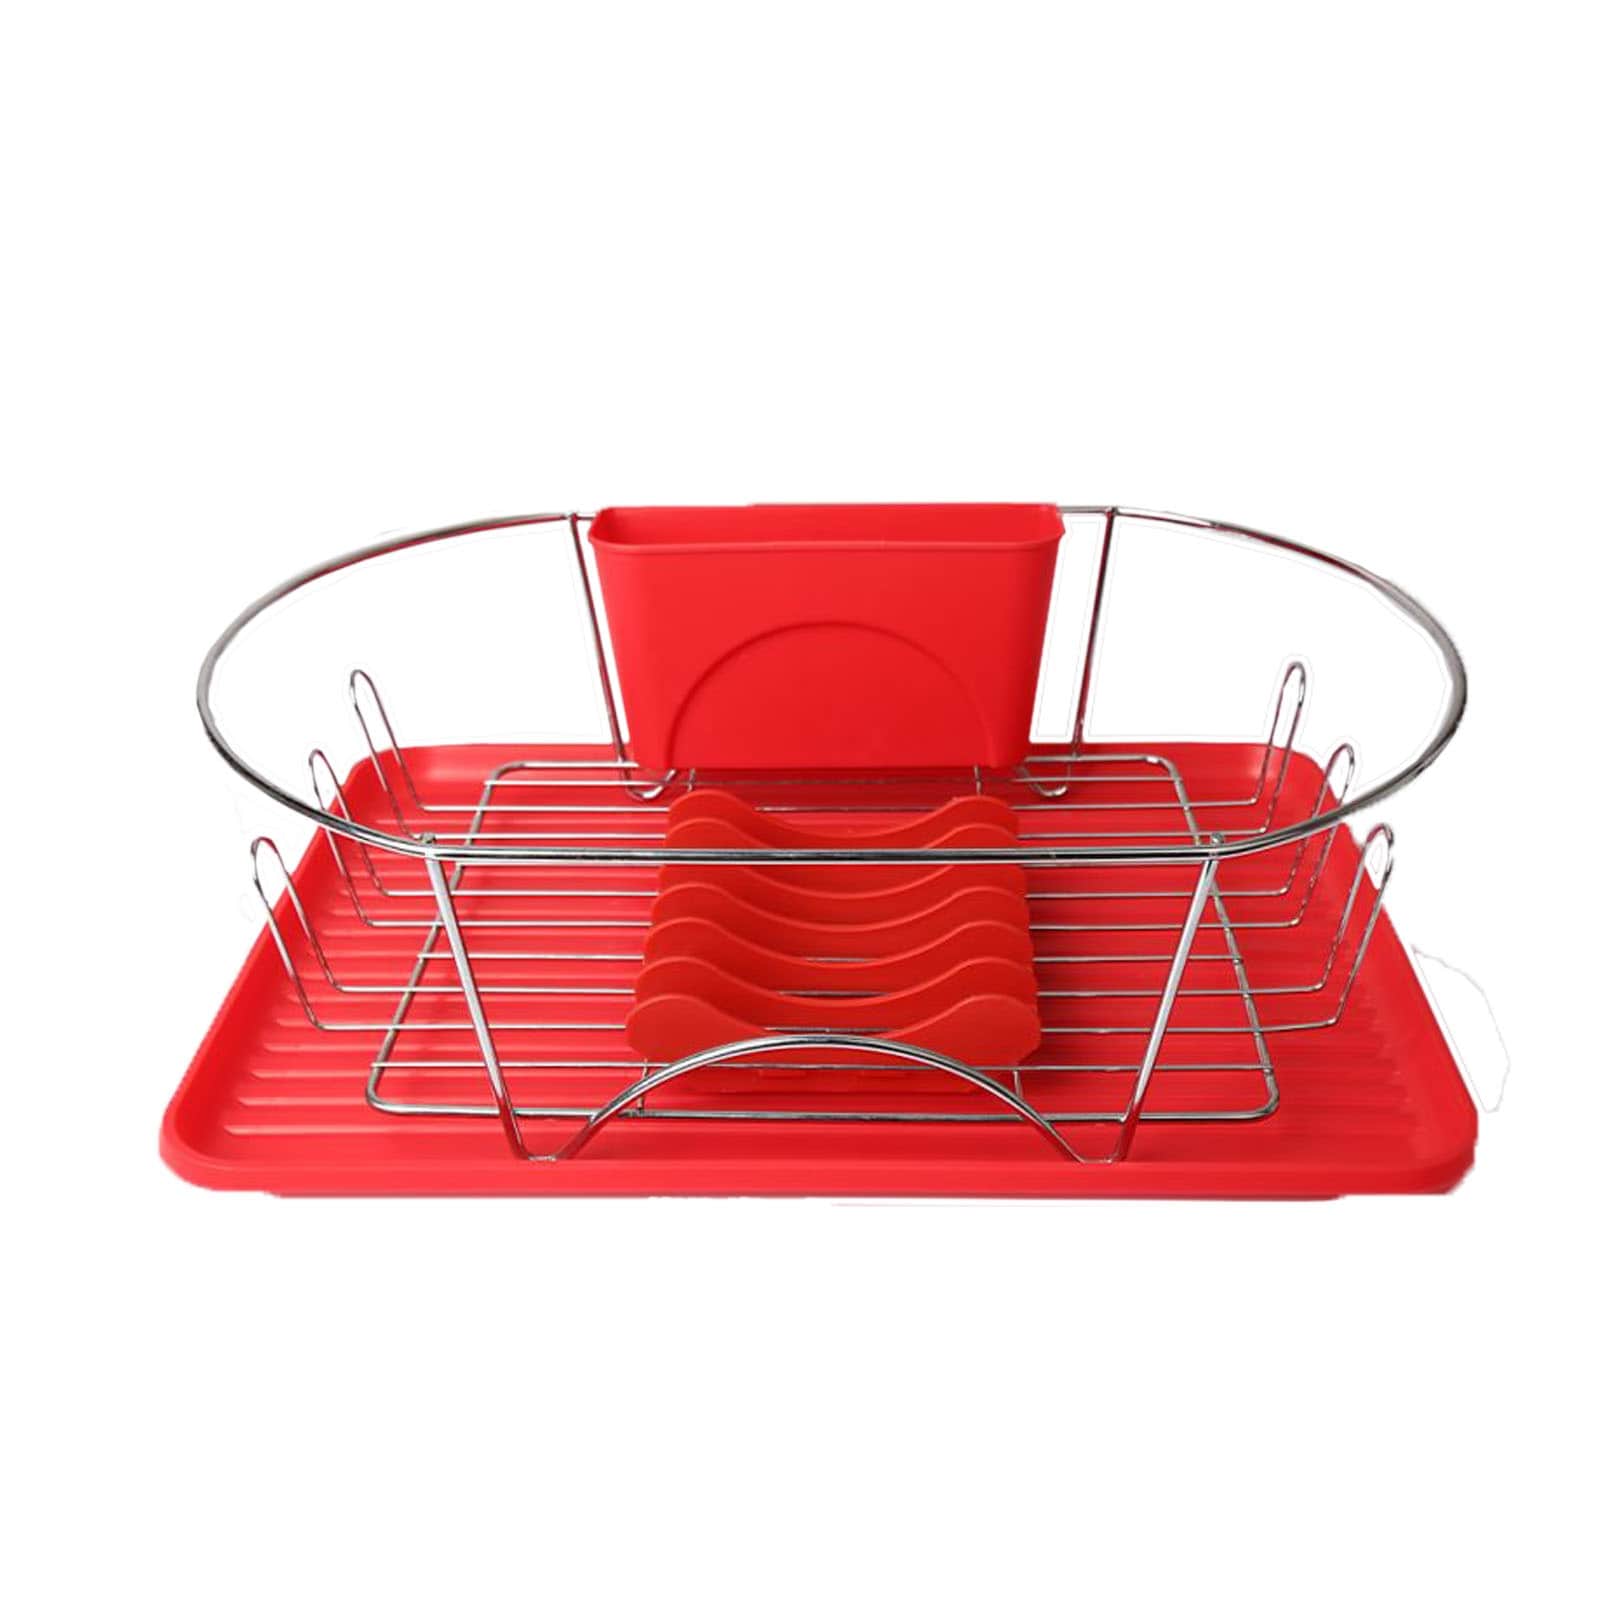 https://ak1.ostkcdn.com/images/products/is/images/direct/8555f48d0feda86b91121239483a3c92e39d9ef3/MegaChef-Stainless-Steal-Dish-Drying-Rack-with-Drying-Mat-in-Red.jpg